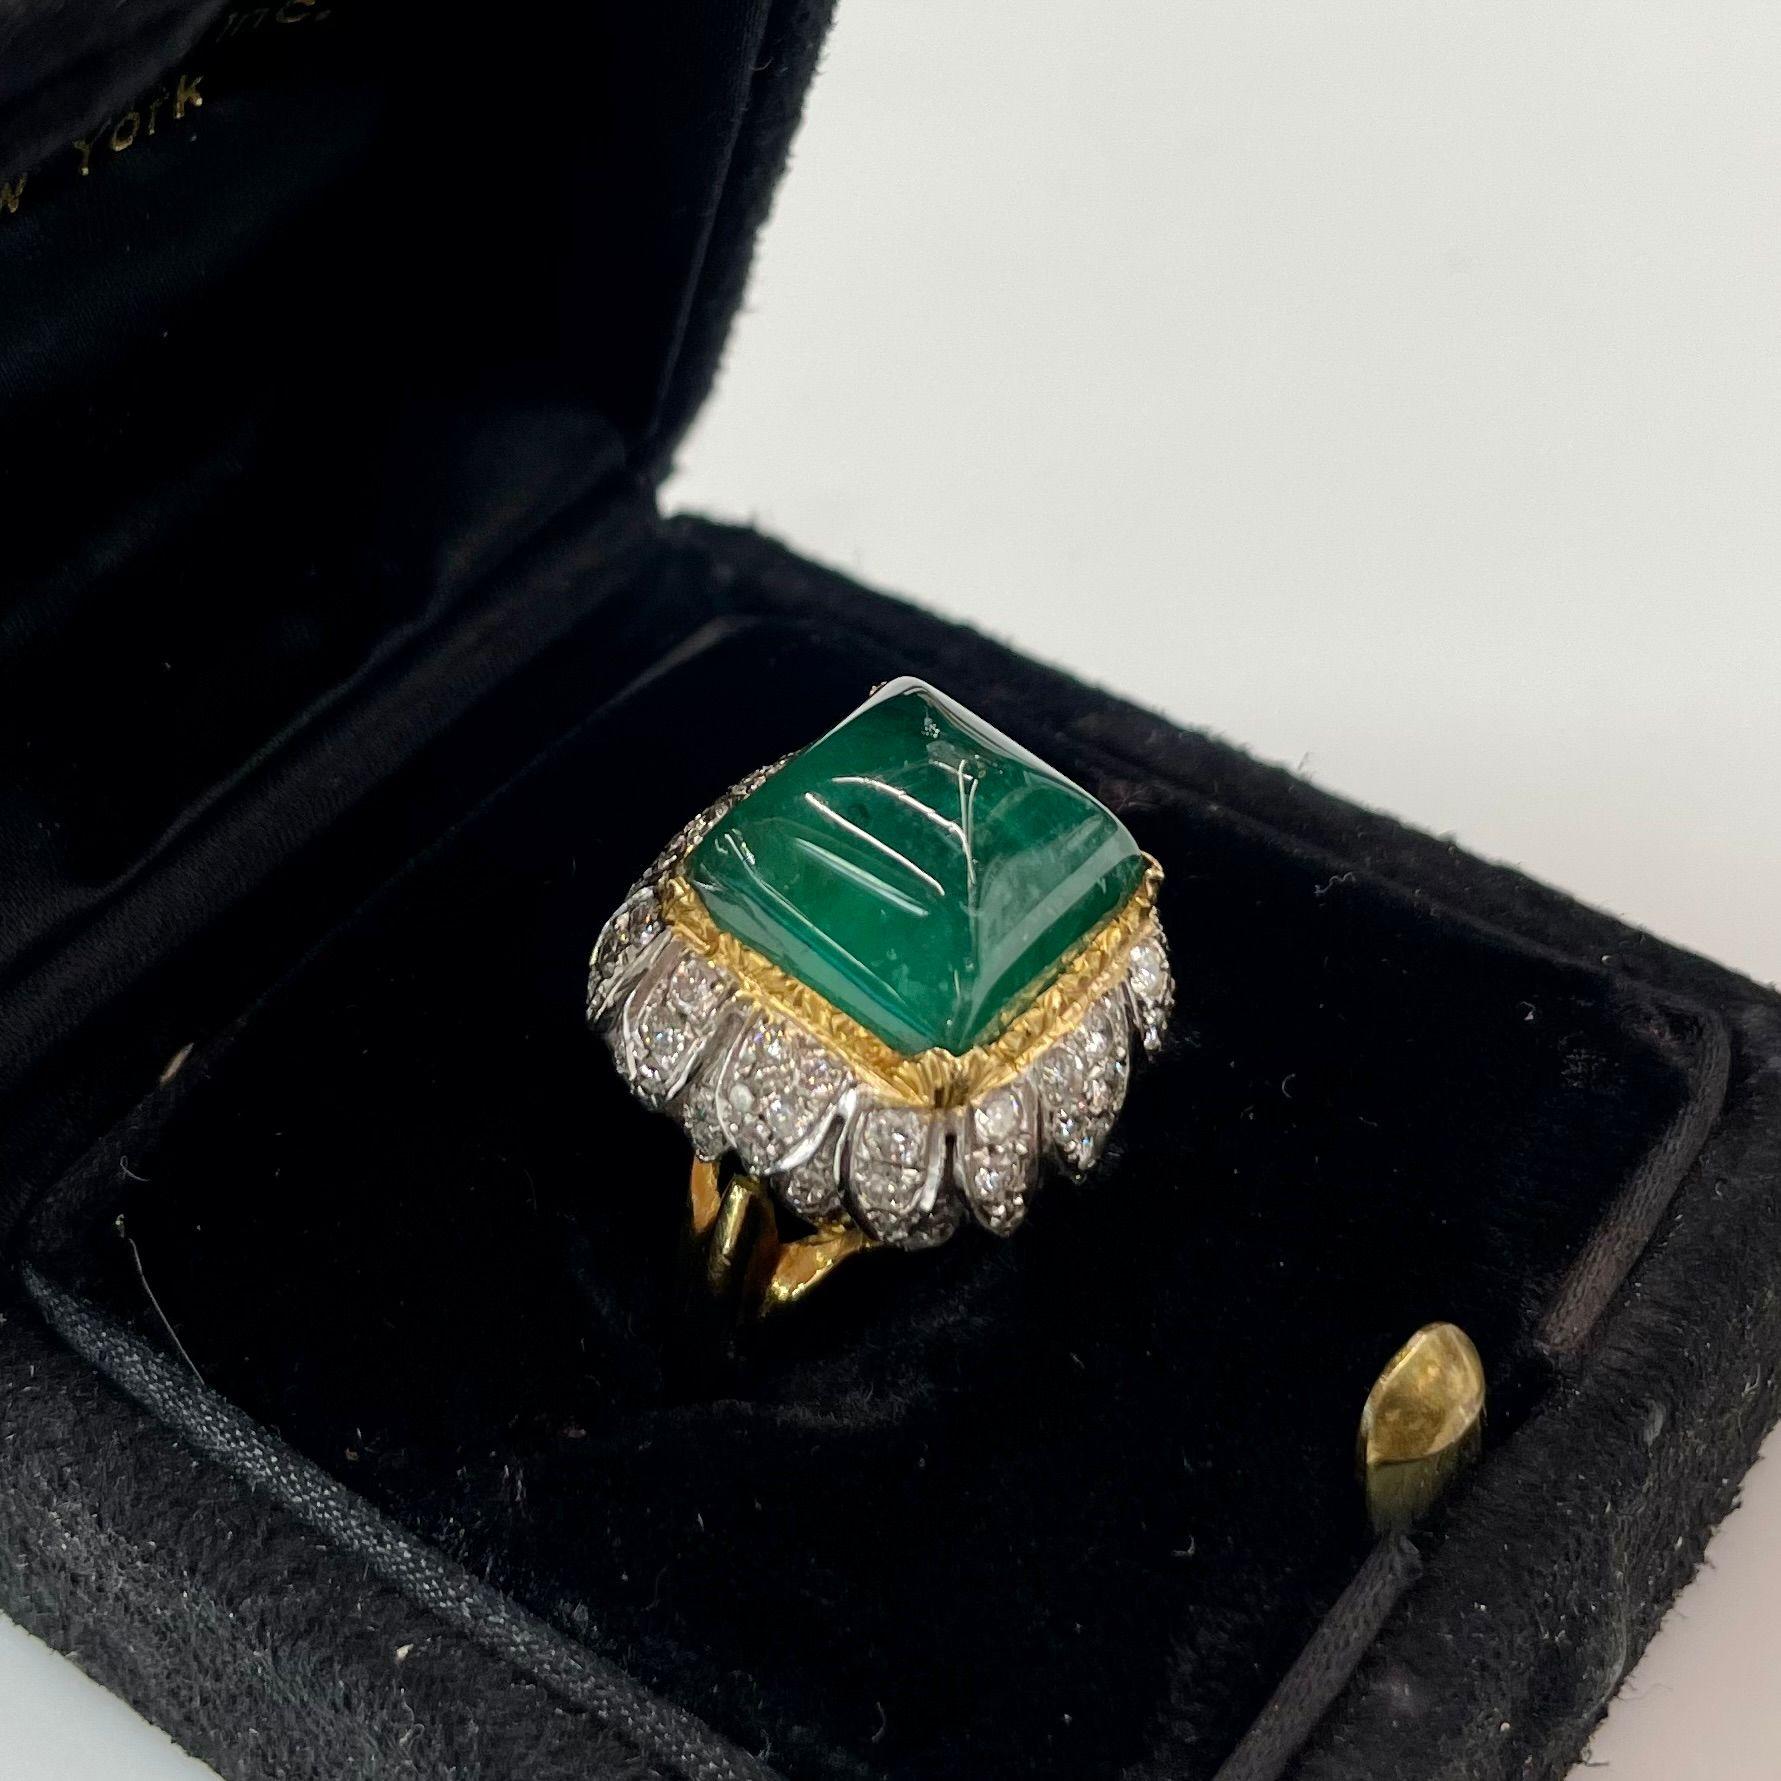 The David Webb 18k yellow gold ring from the 1960s with a genuine green emerald of a sugarloaf cut and round cut diamonds in platinum carriage is definitely a unique and luxurious item.

David Webb was a well-known American jewelry designer who